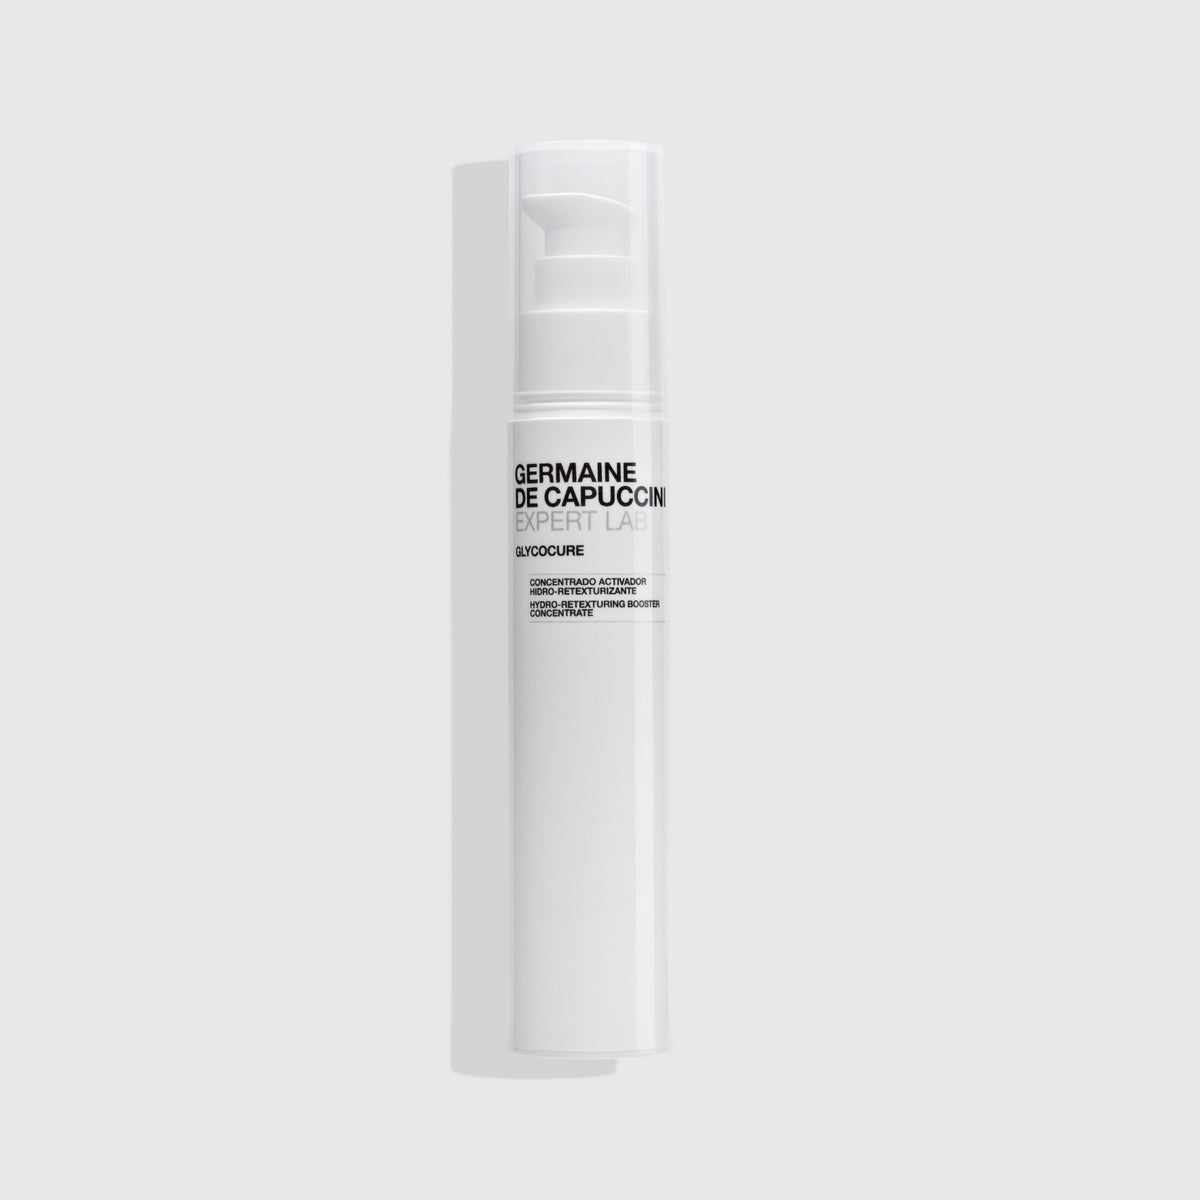 Germaine de Capuccini Expert Lab Glycocure Hydro-Retexturing Booster Concentrate